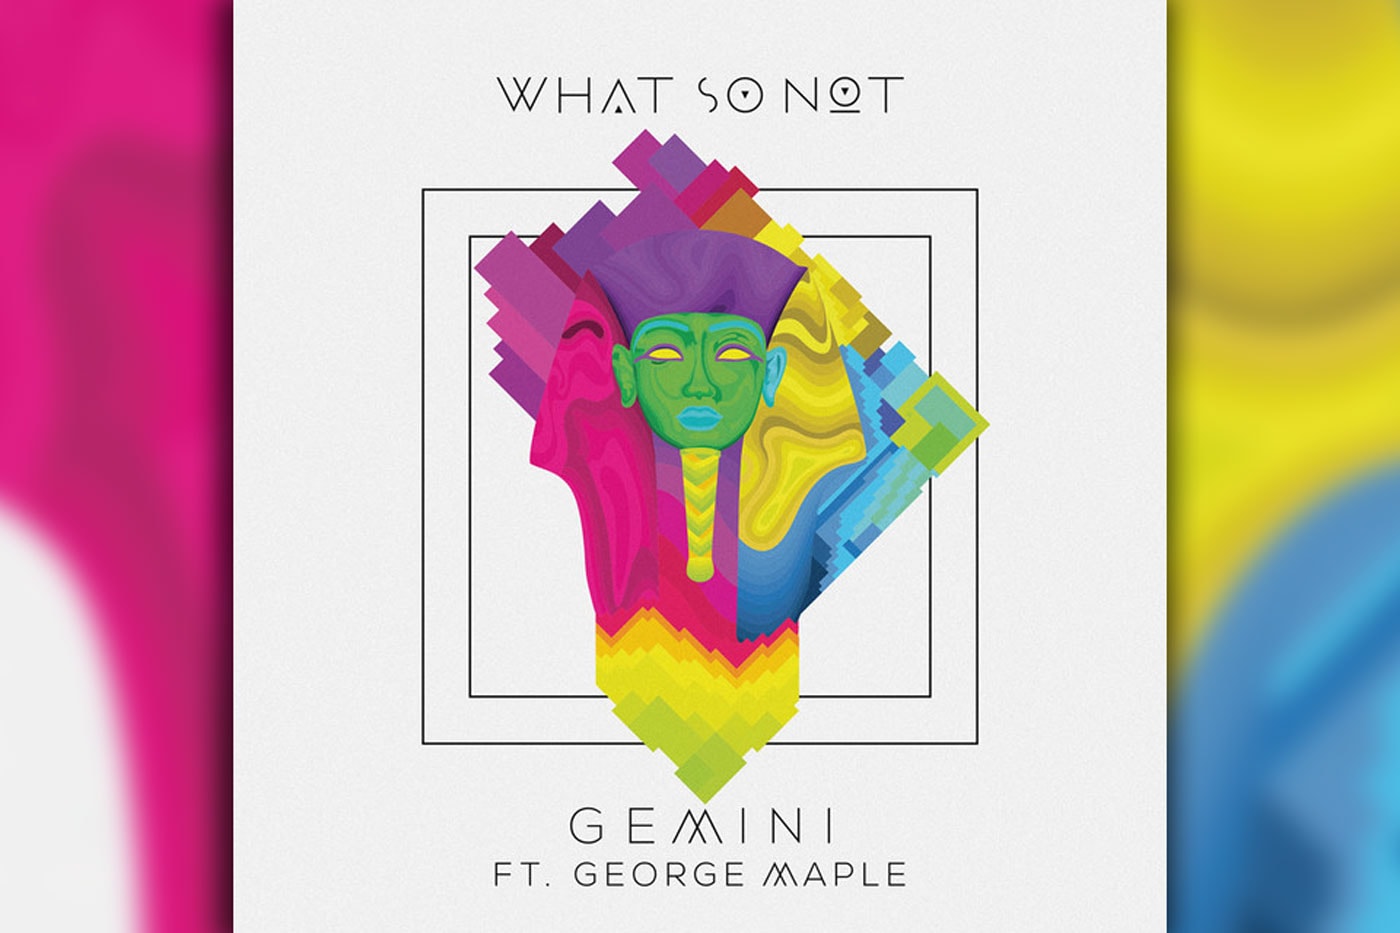 What So Not’s 'Gemini' EP Gets a Release Date